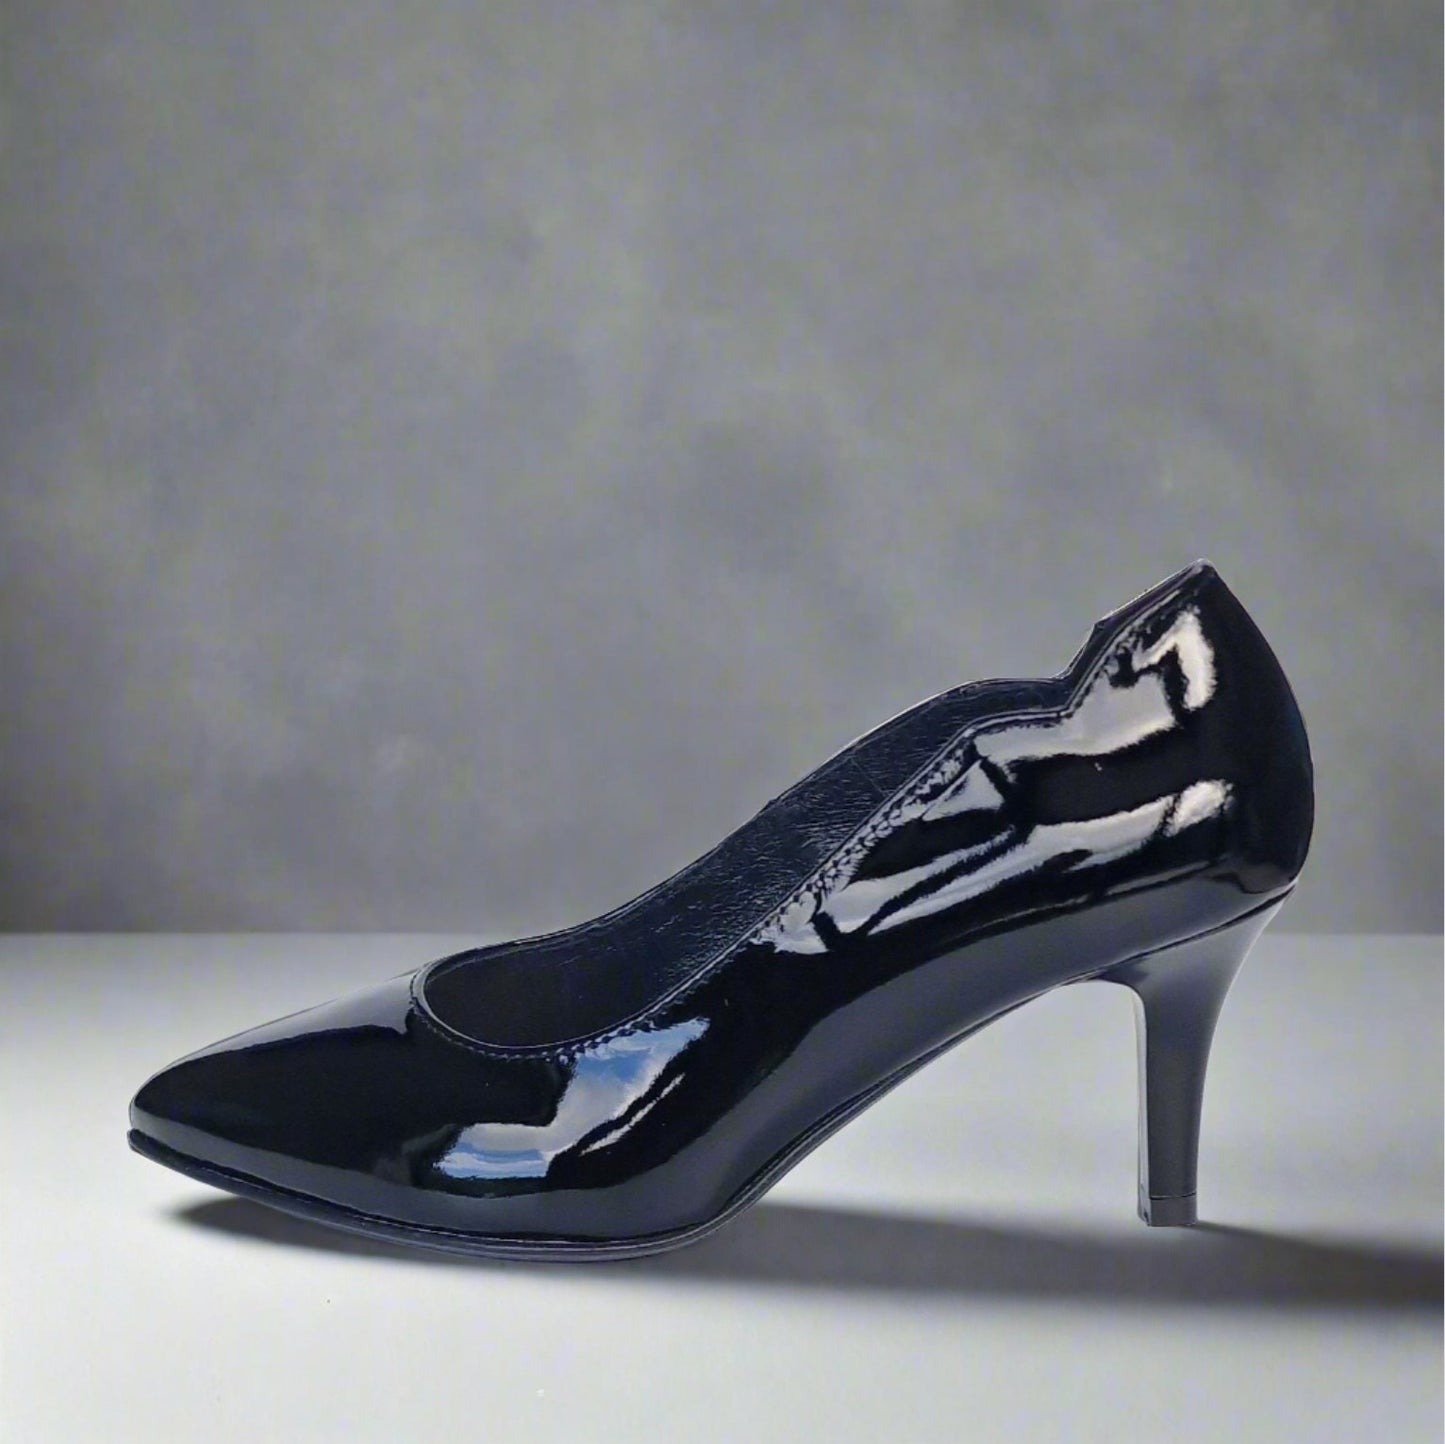 Petite size court heels in black patent leather 